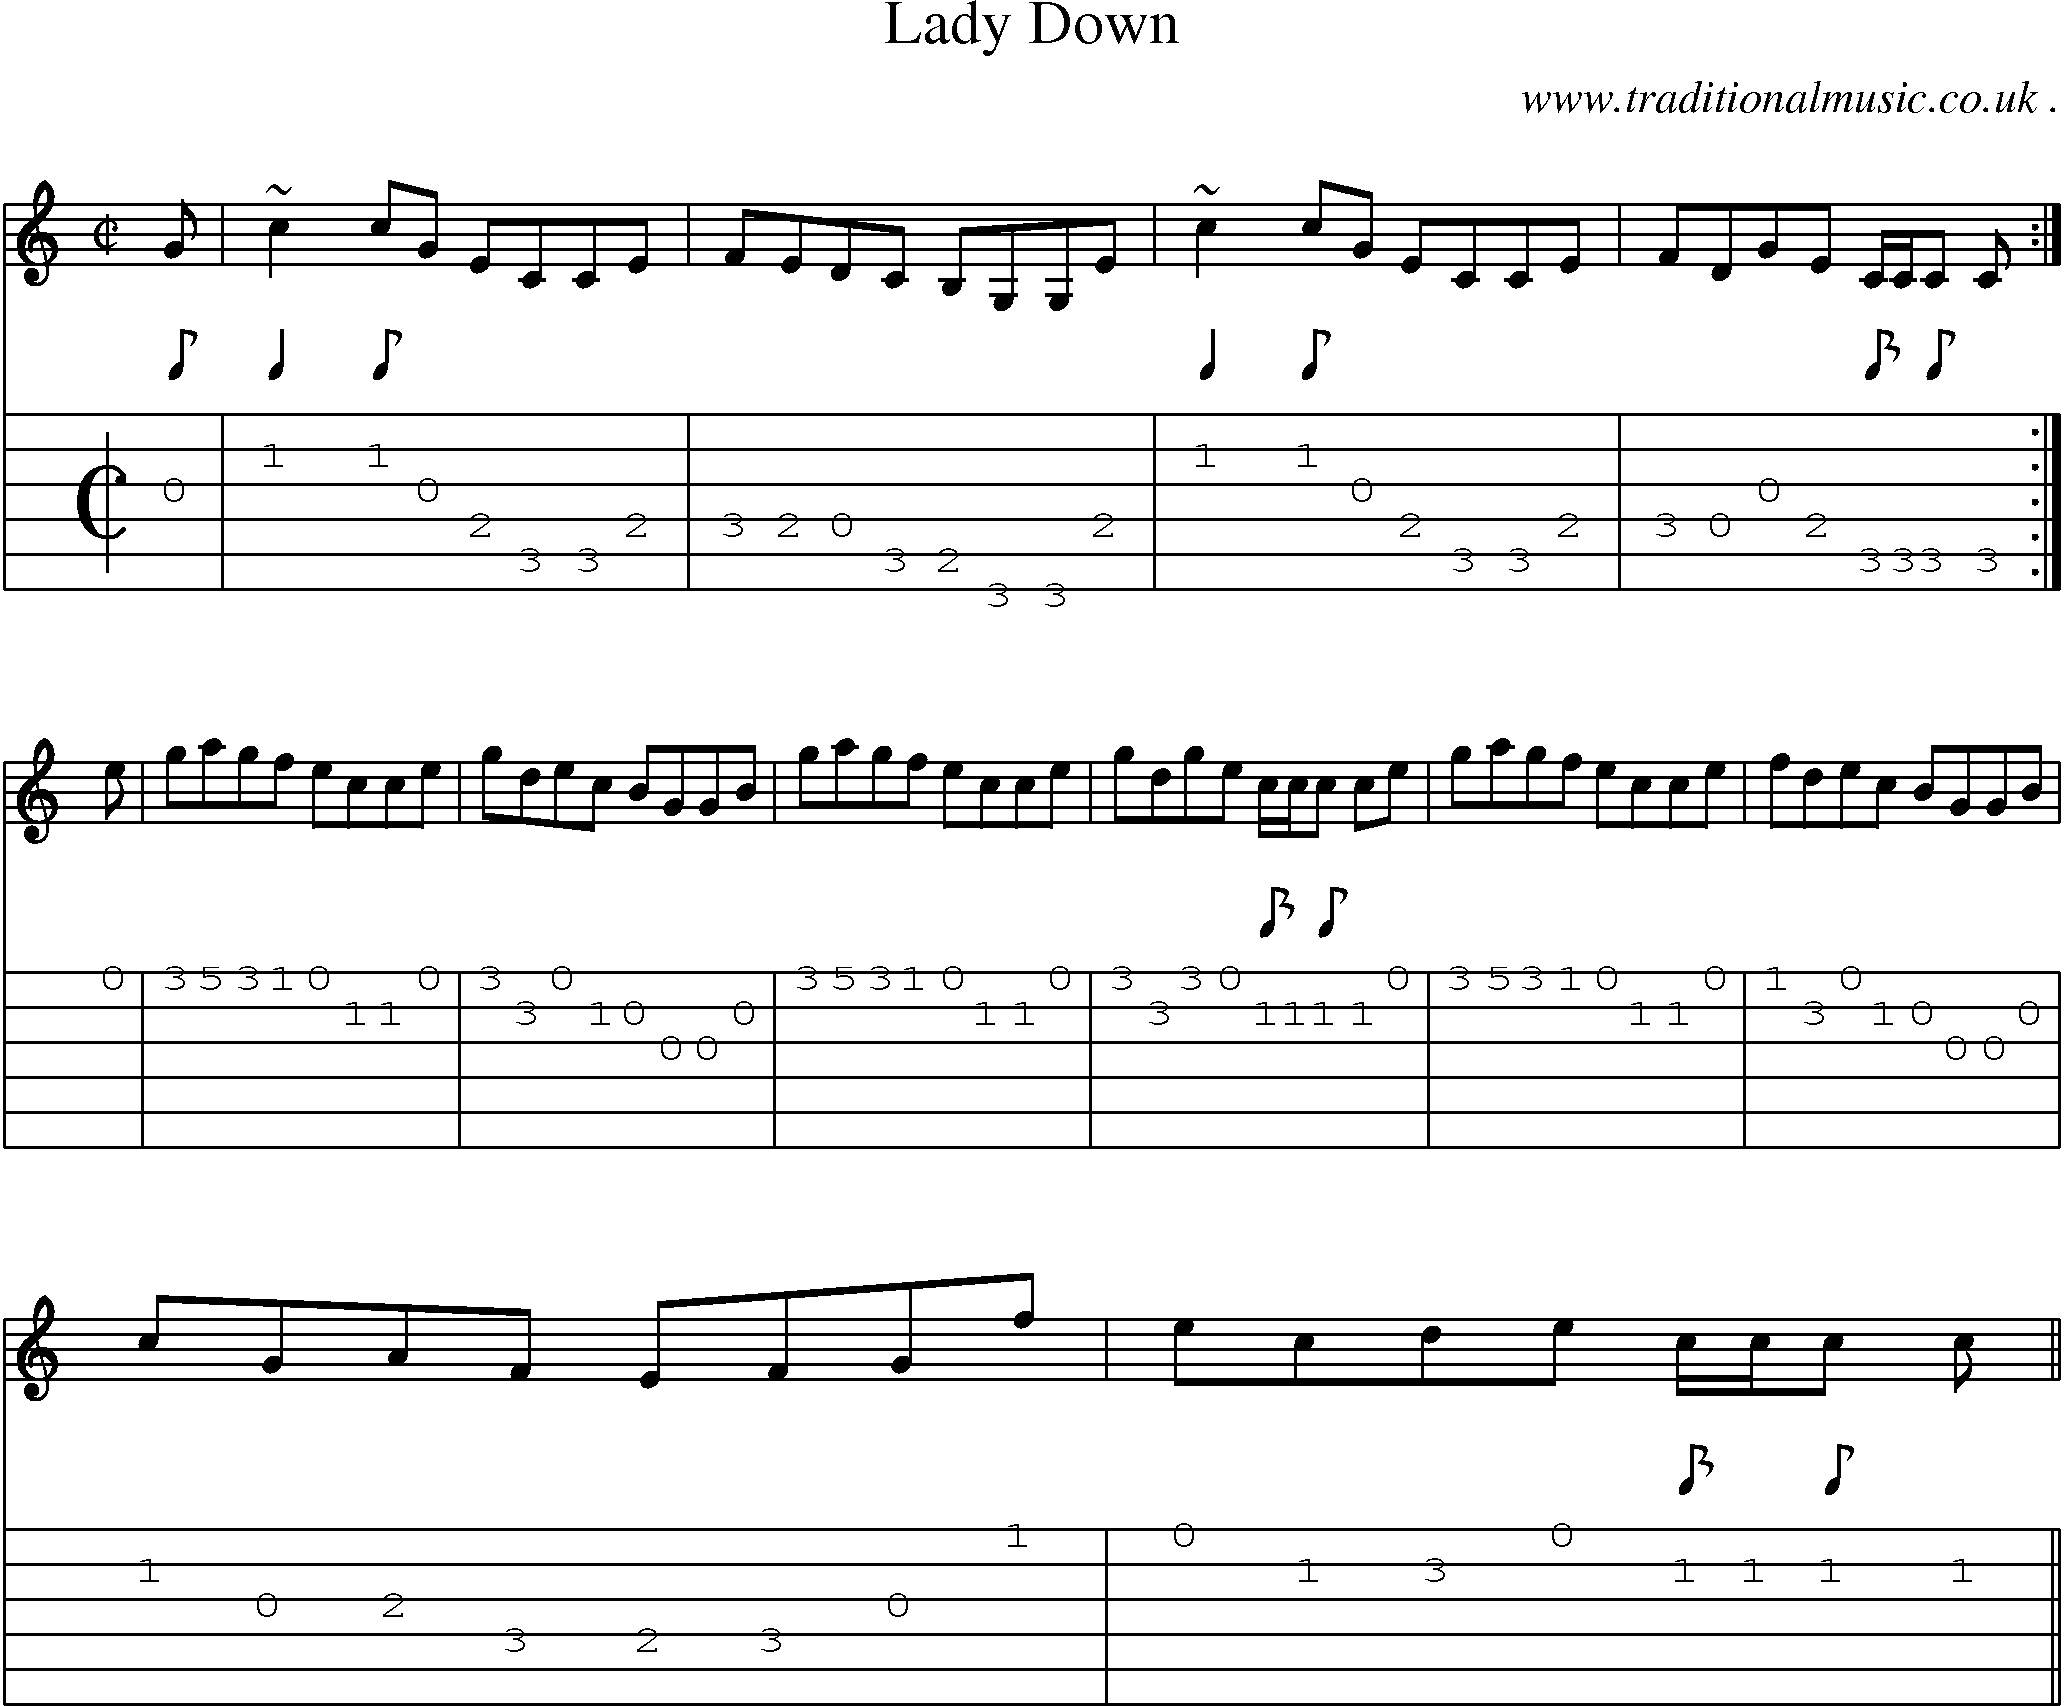 Sheet-music  score, Chords and Guitar Tabs for Lady Down